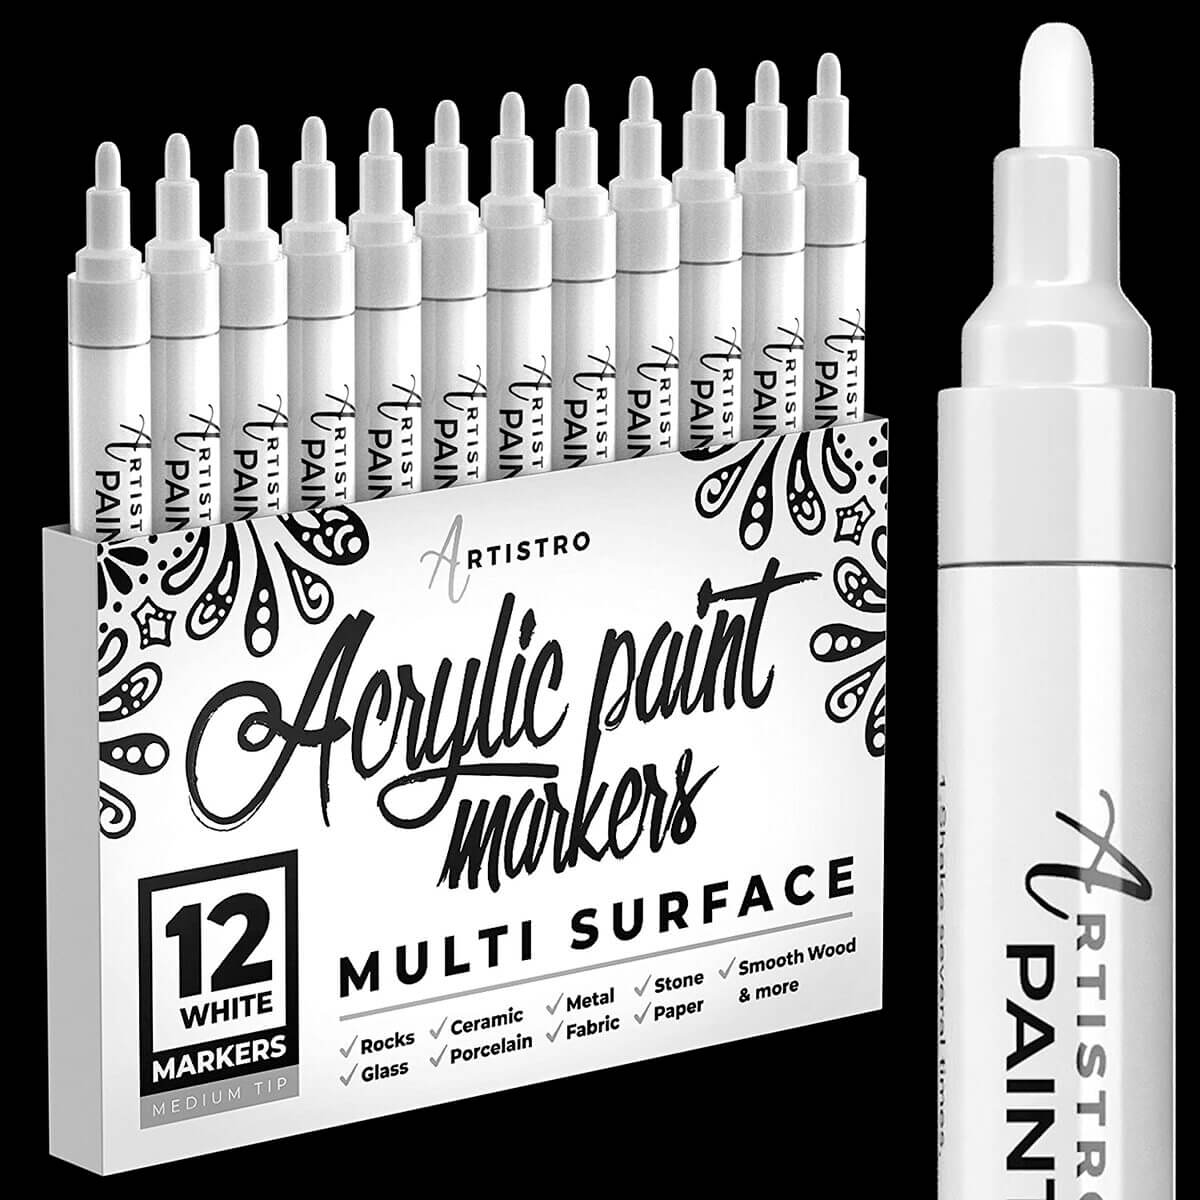 ARTISTRO Set of 12 Medium Tip White Paint Pens for Rock Painting, Stone, Ceramic, Glass, Wood, Tire, Fabric, Metal, Canvas, Size: Medium Tip 1mm